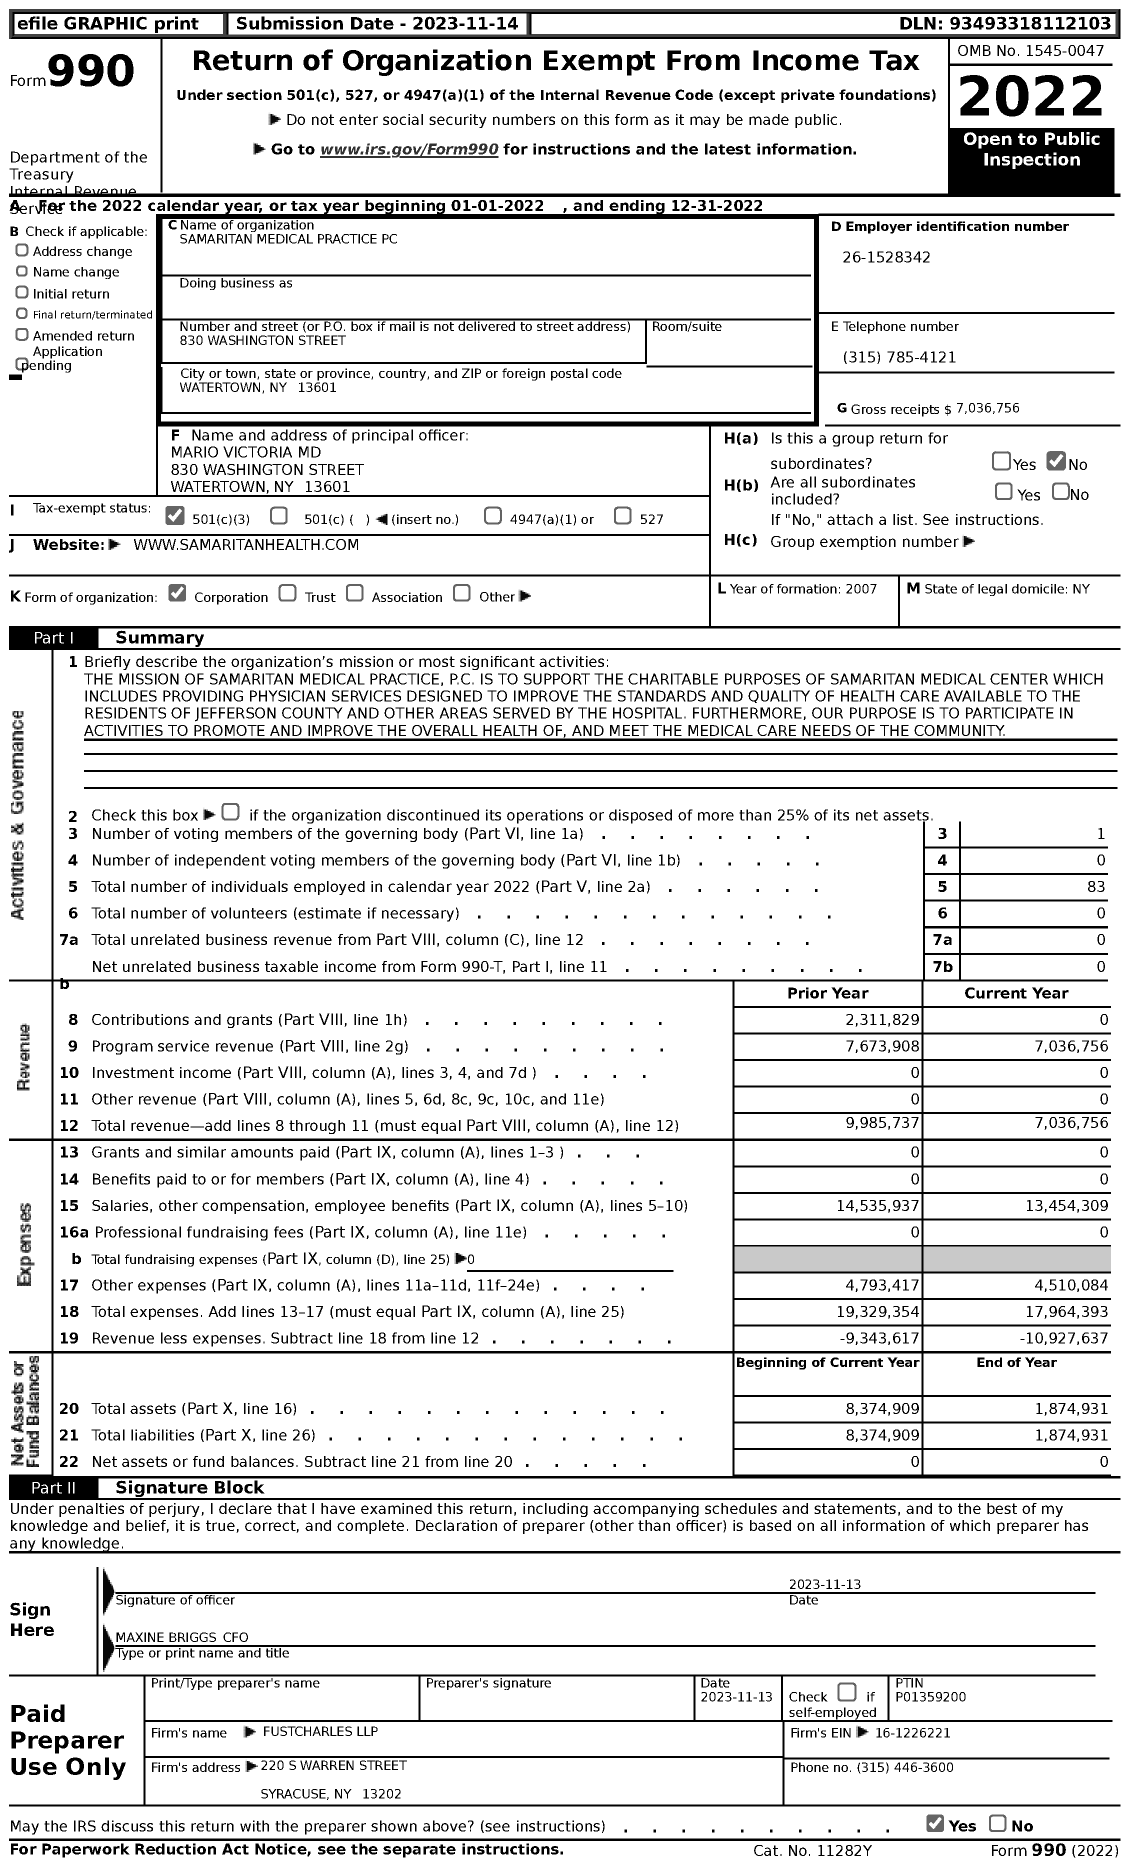 Image of first page of 2022 Form 990 for Samaritan Medical Practice PC (SMC)